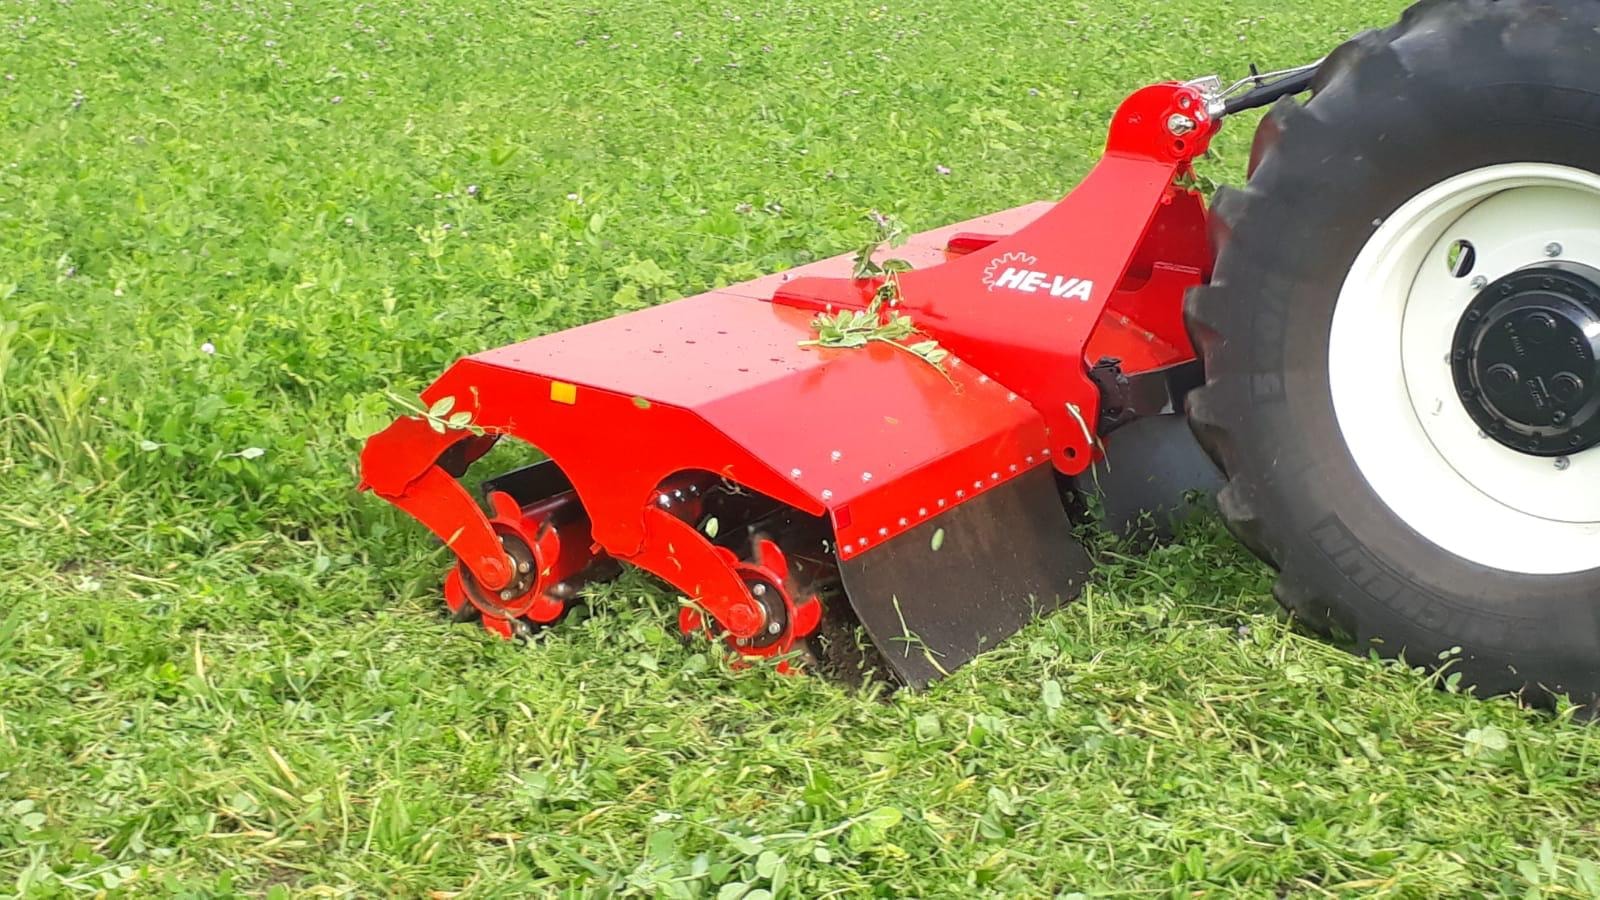 OPICO to launch HE-VA’s Top Cutter Solo at Cereals 2021